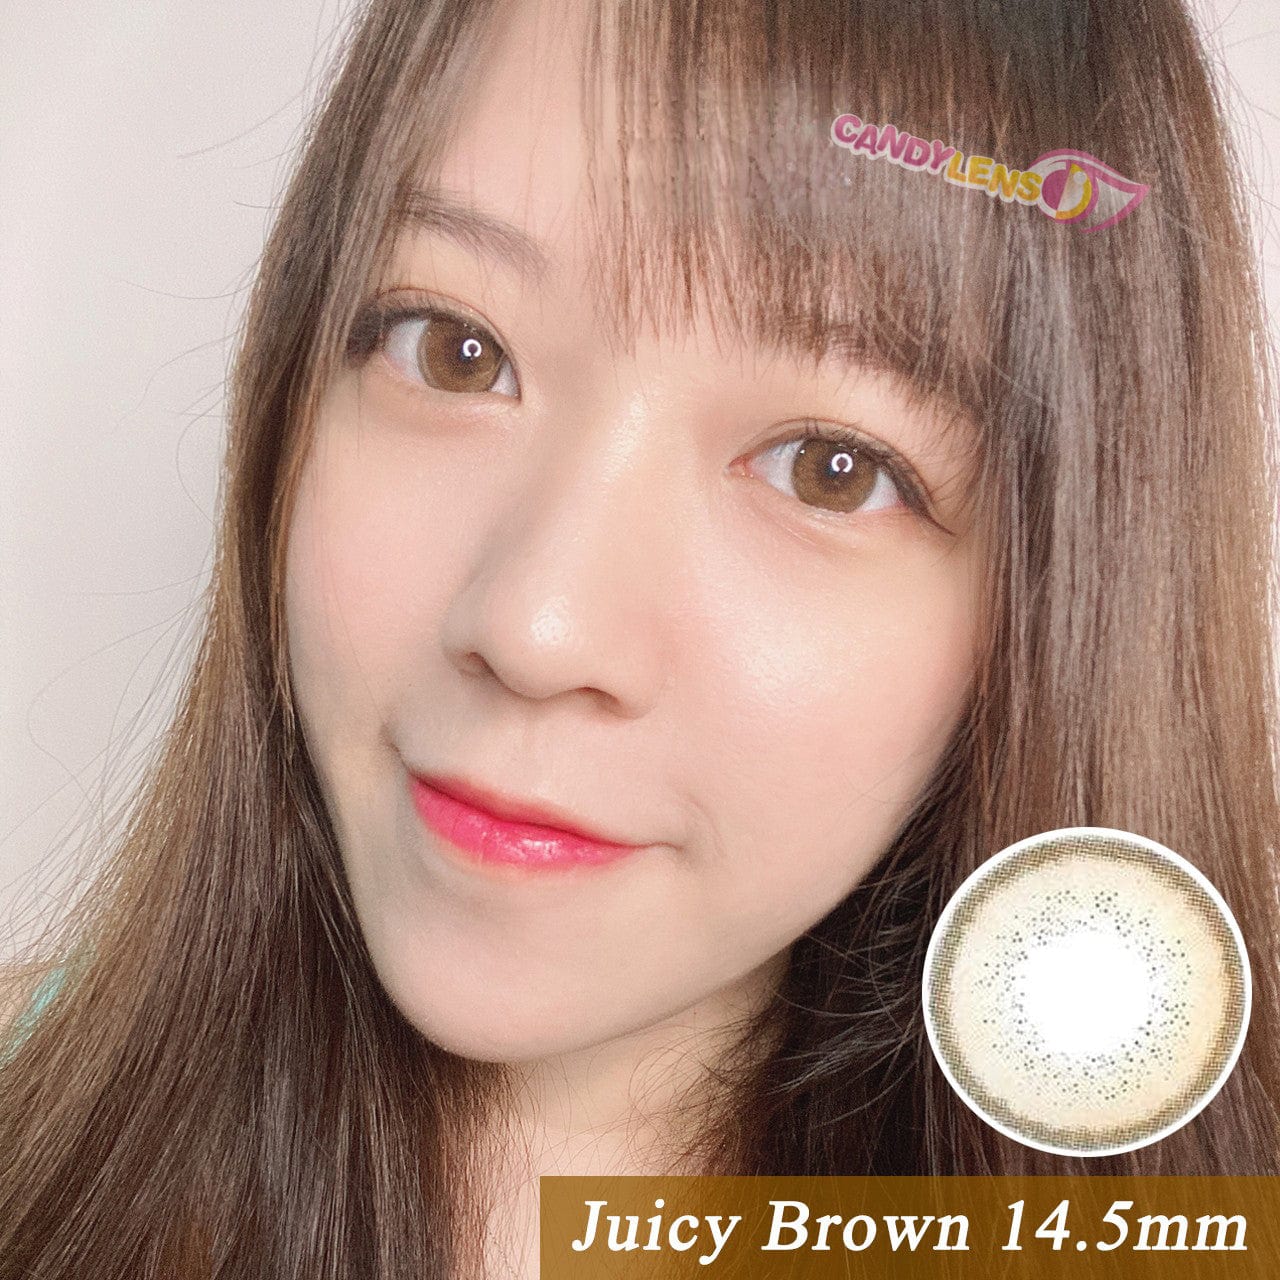 Royal Candy (monthly) Juicy Brown